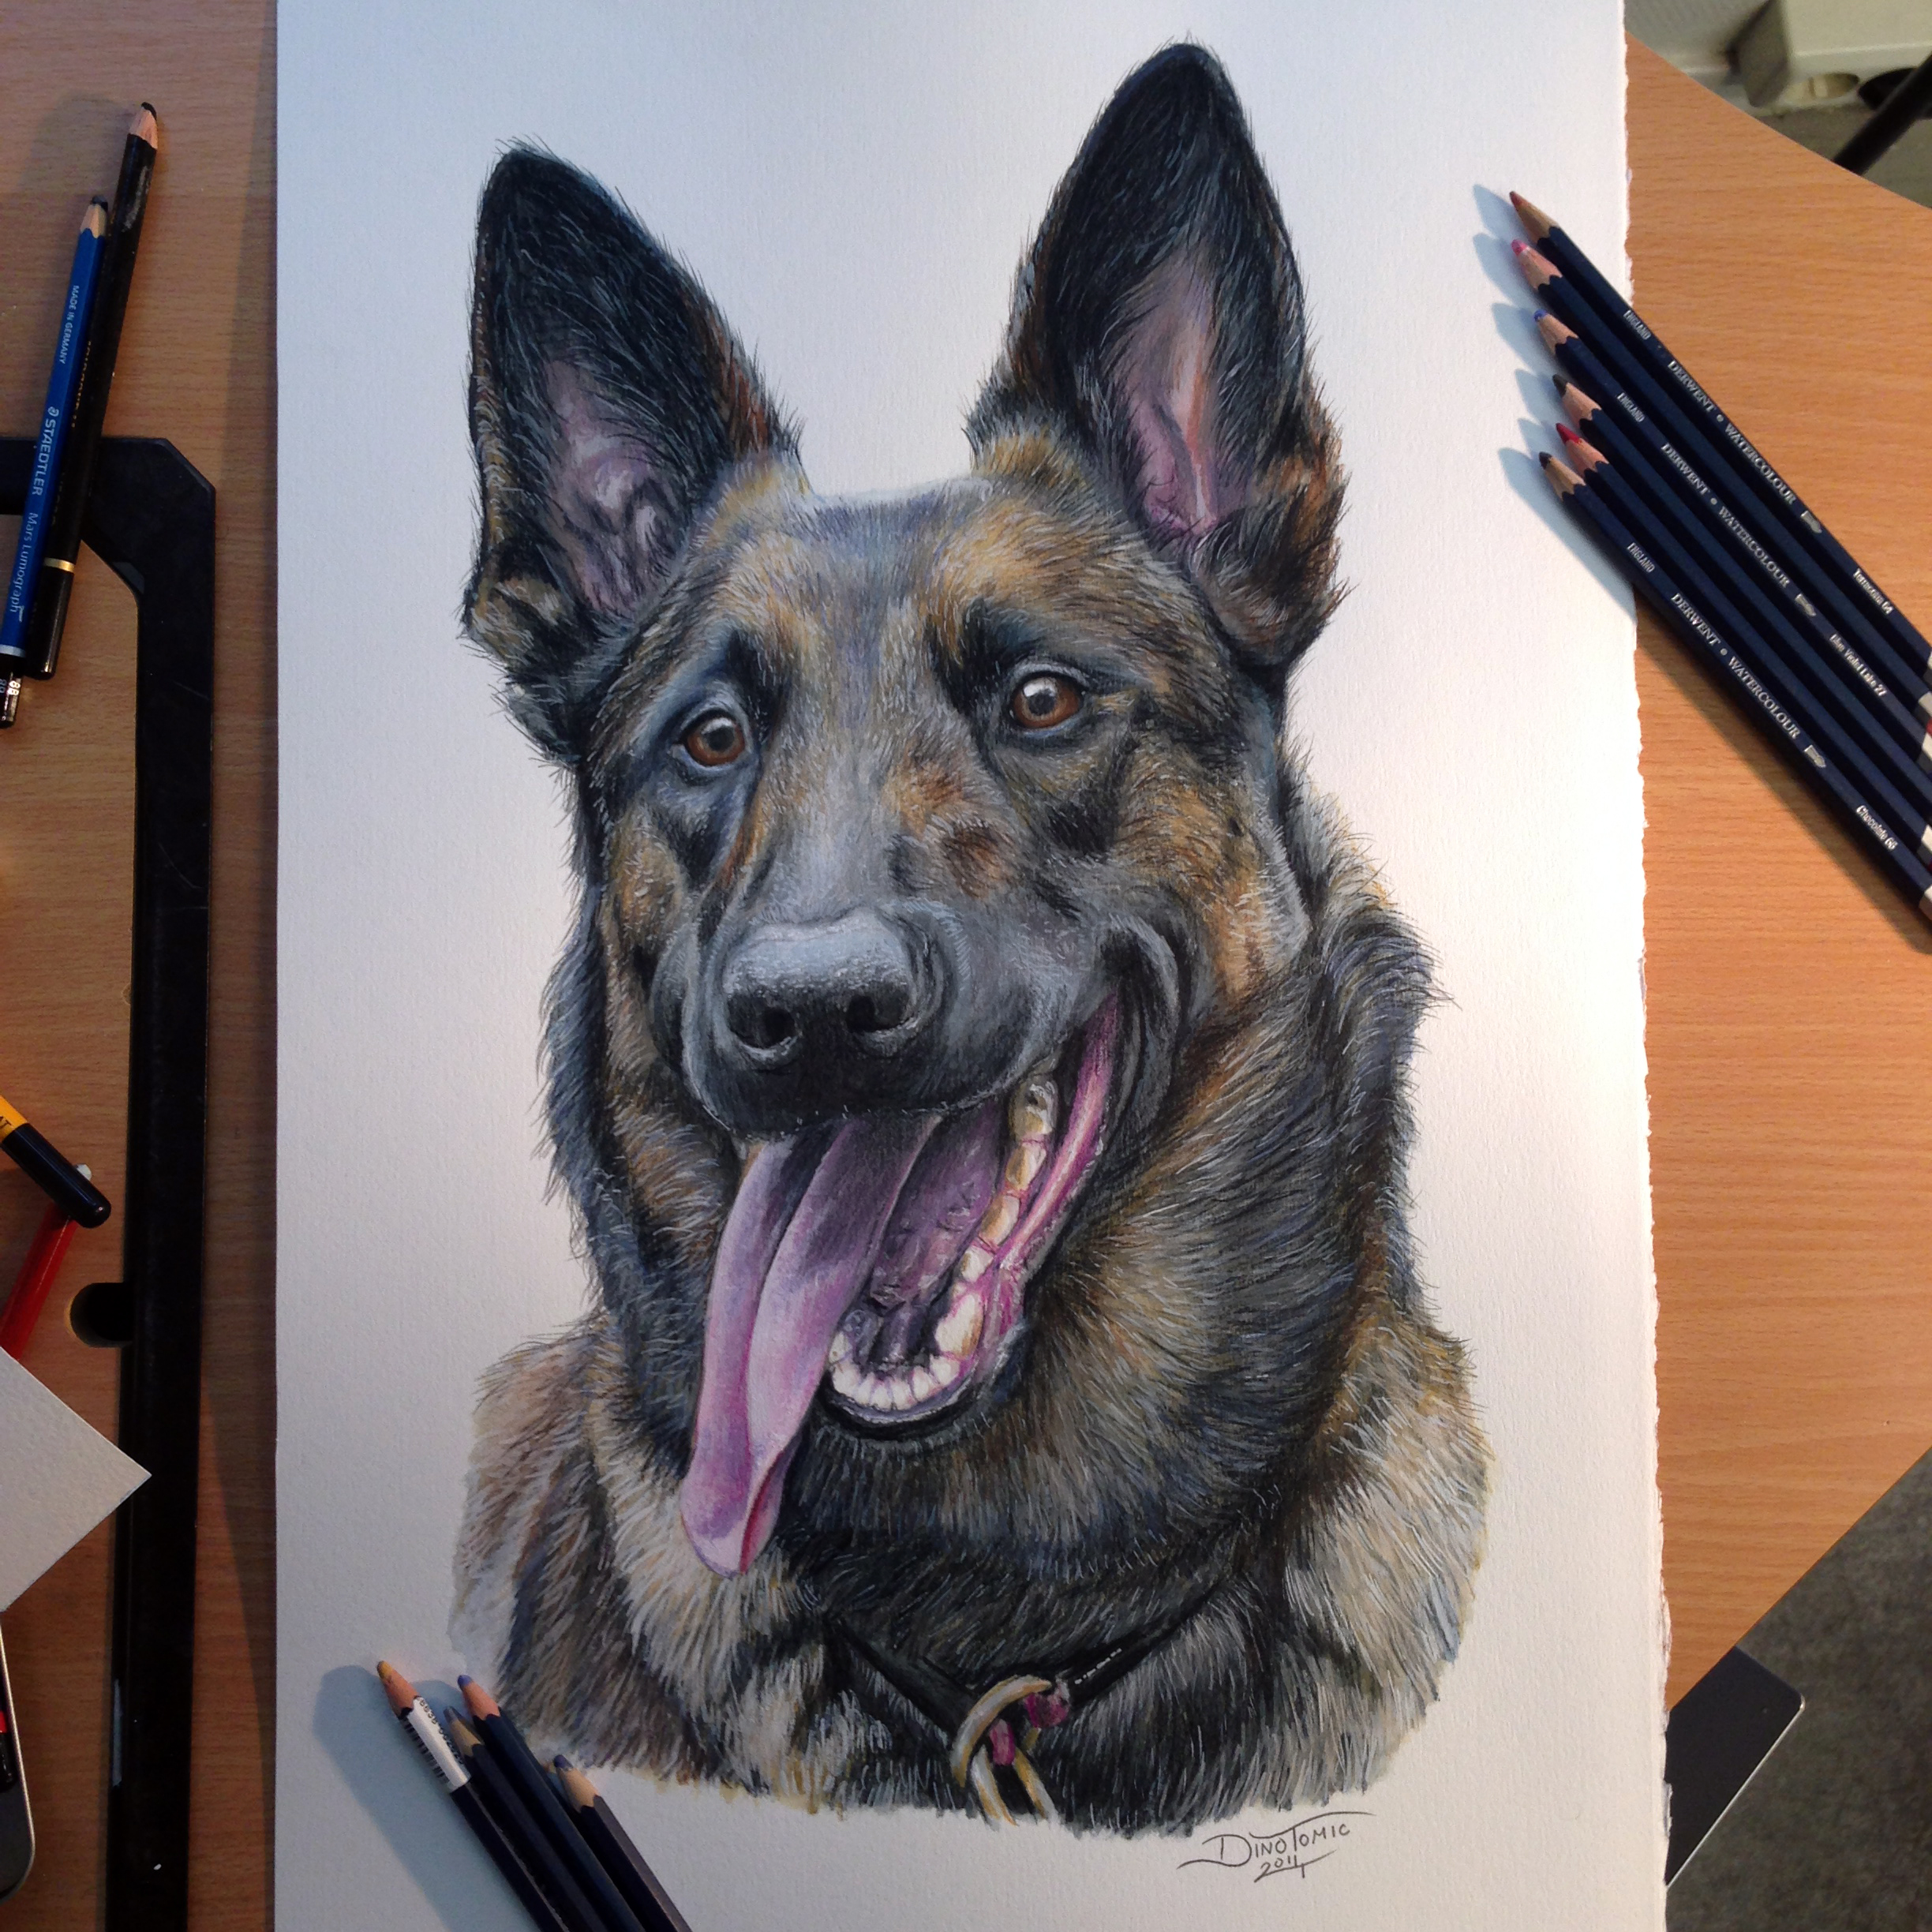 color-pencil-drawing-of-a-dog-by-atomiccircus-on-deviantart